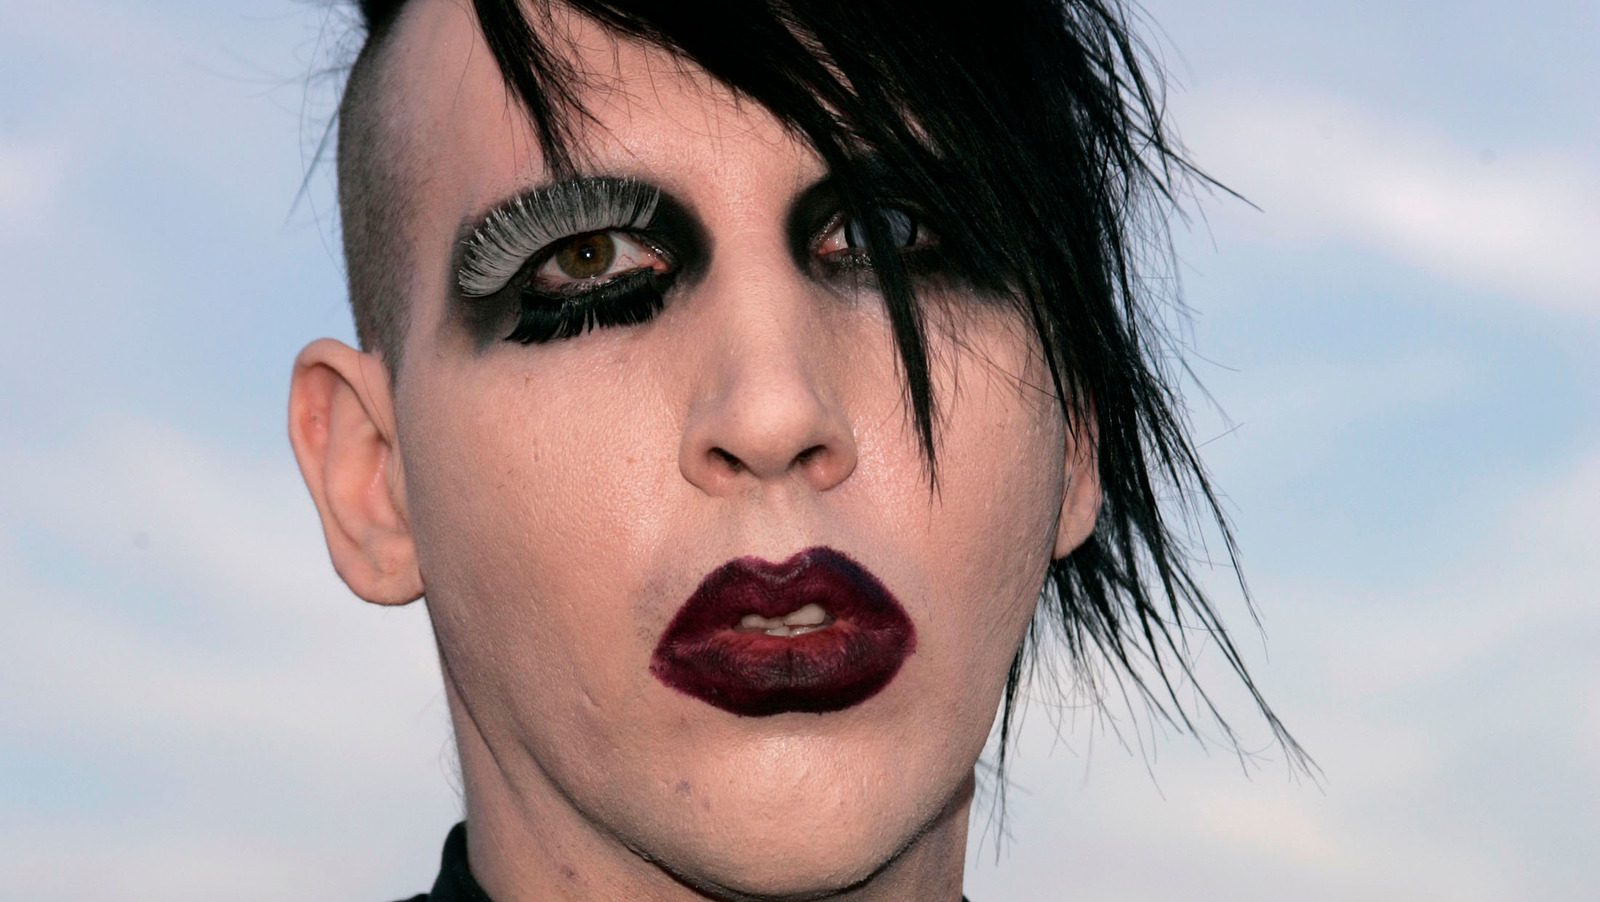 Heres What Marilyn Manson Really Looks Like Without Makeup